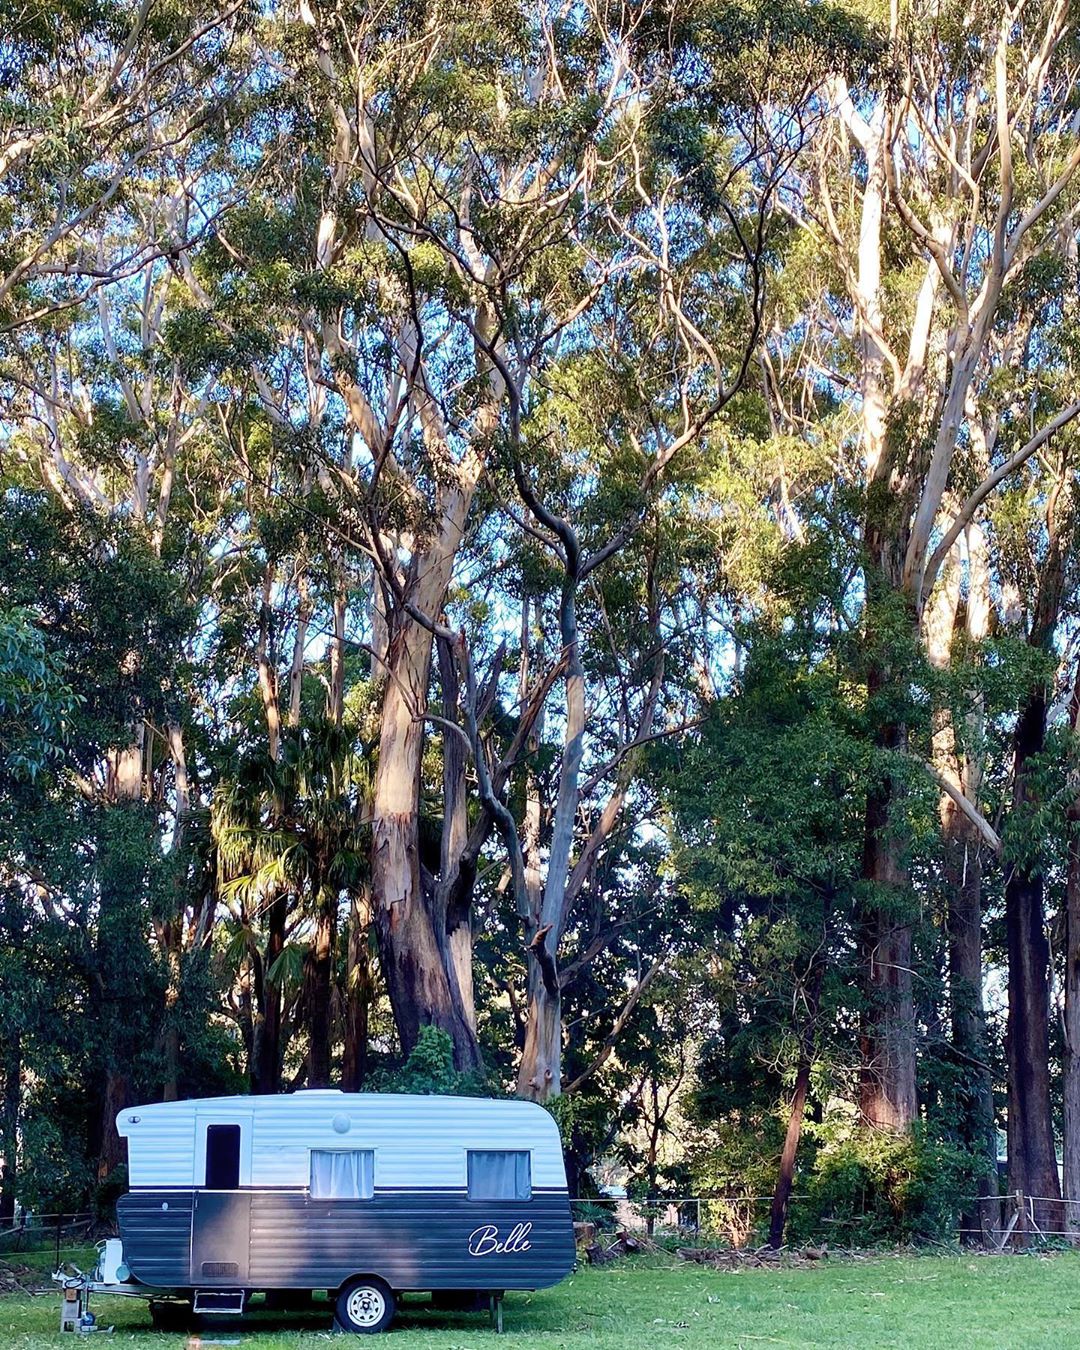 Vintage caravan parked in front of a wall of trees.